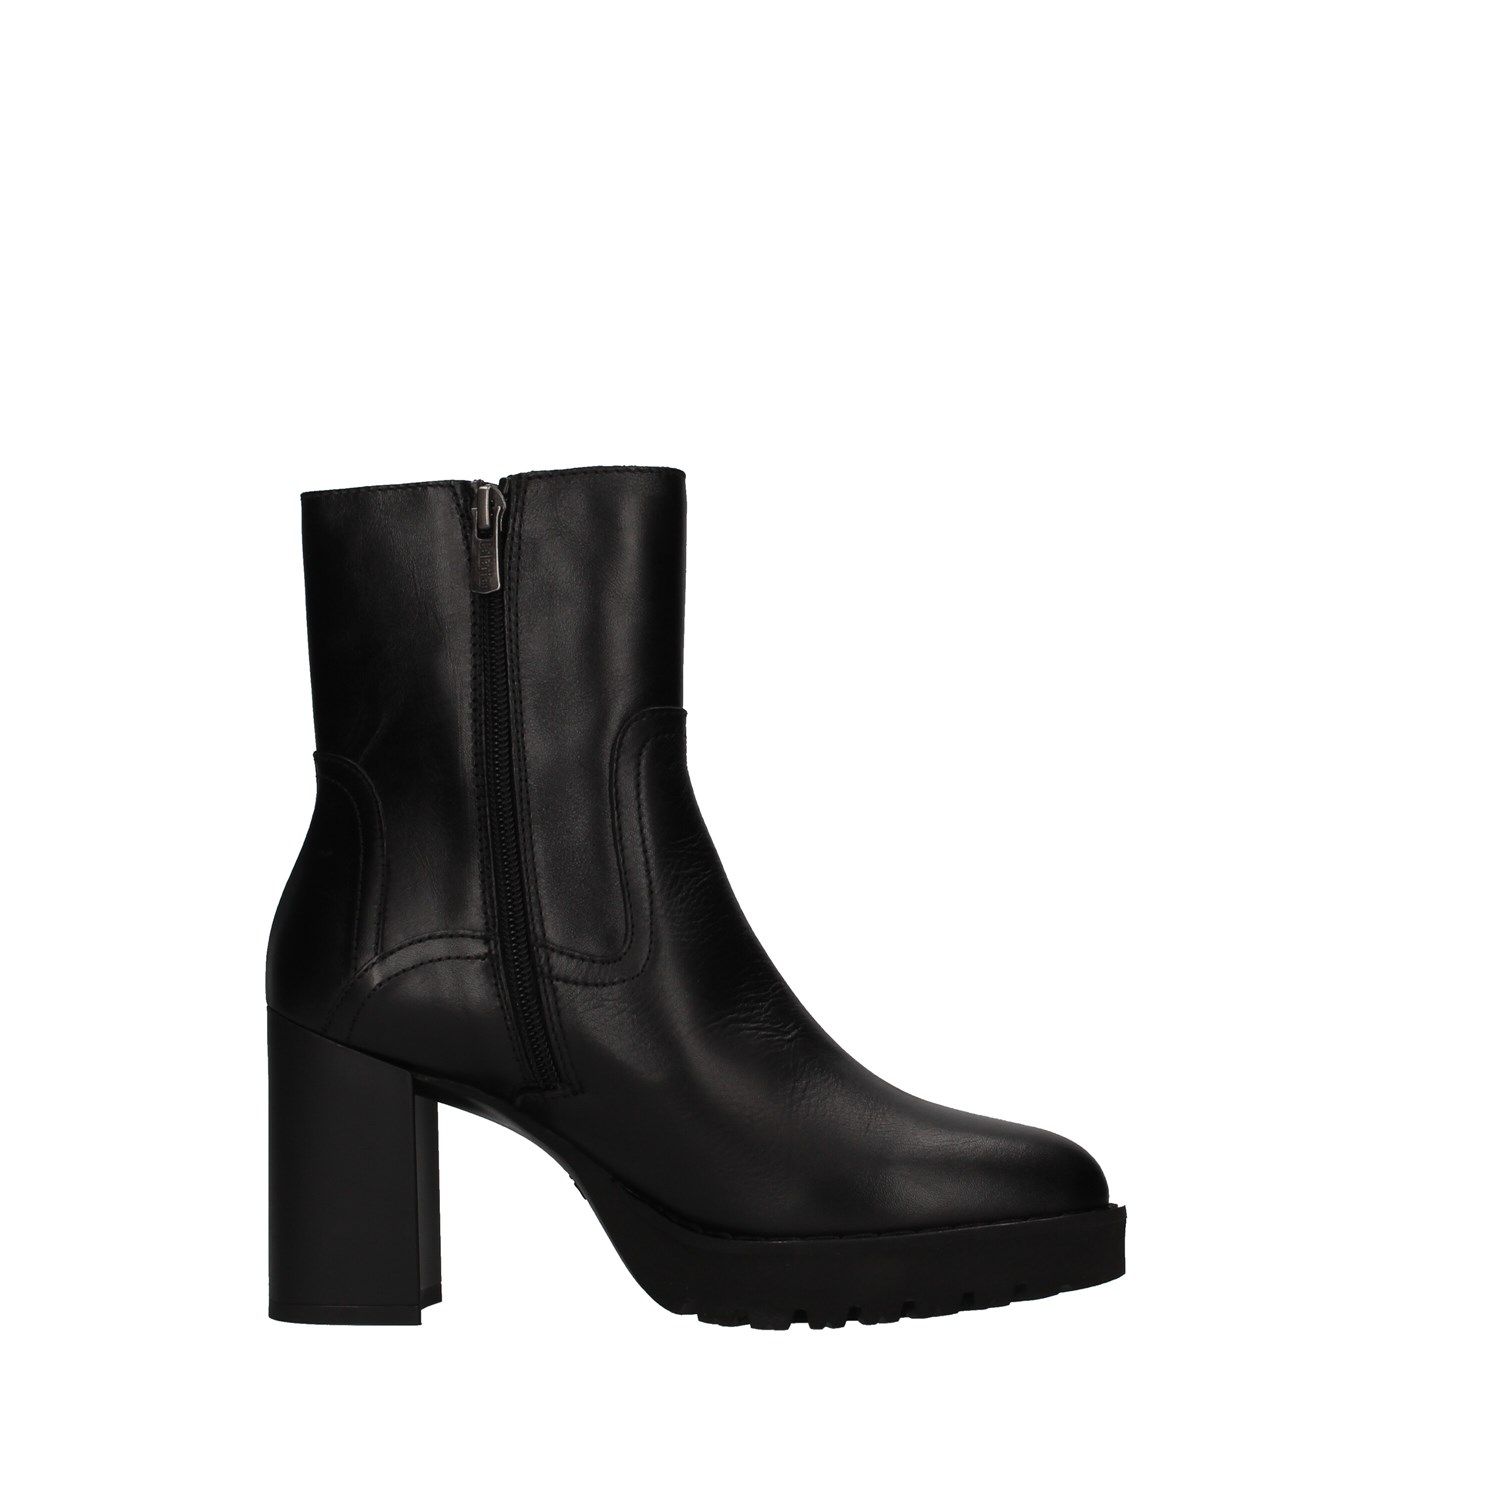 Callaghan Shoes Woman boots BLACK 29305